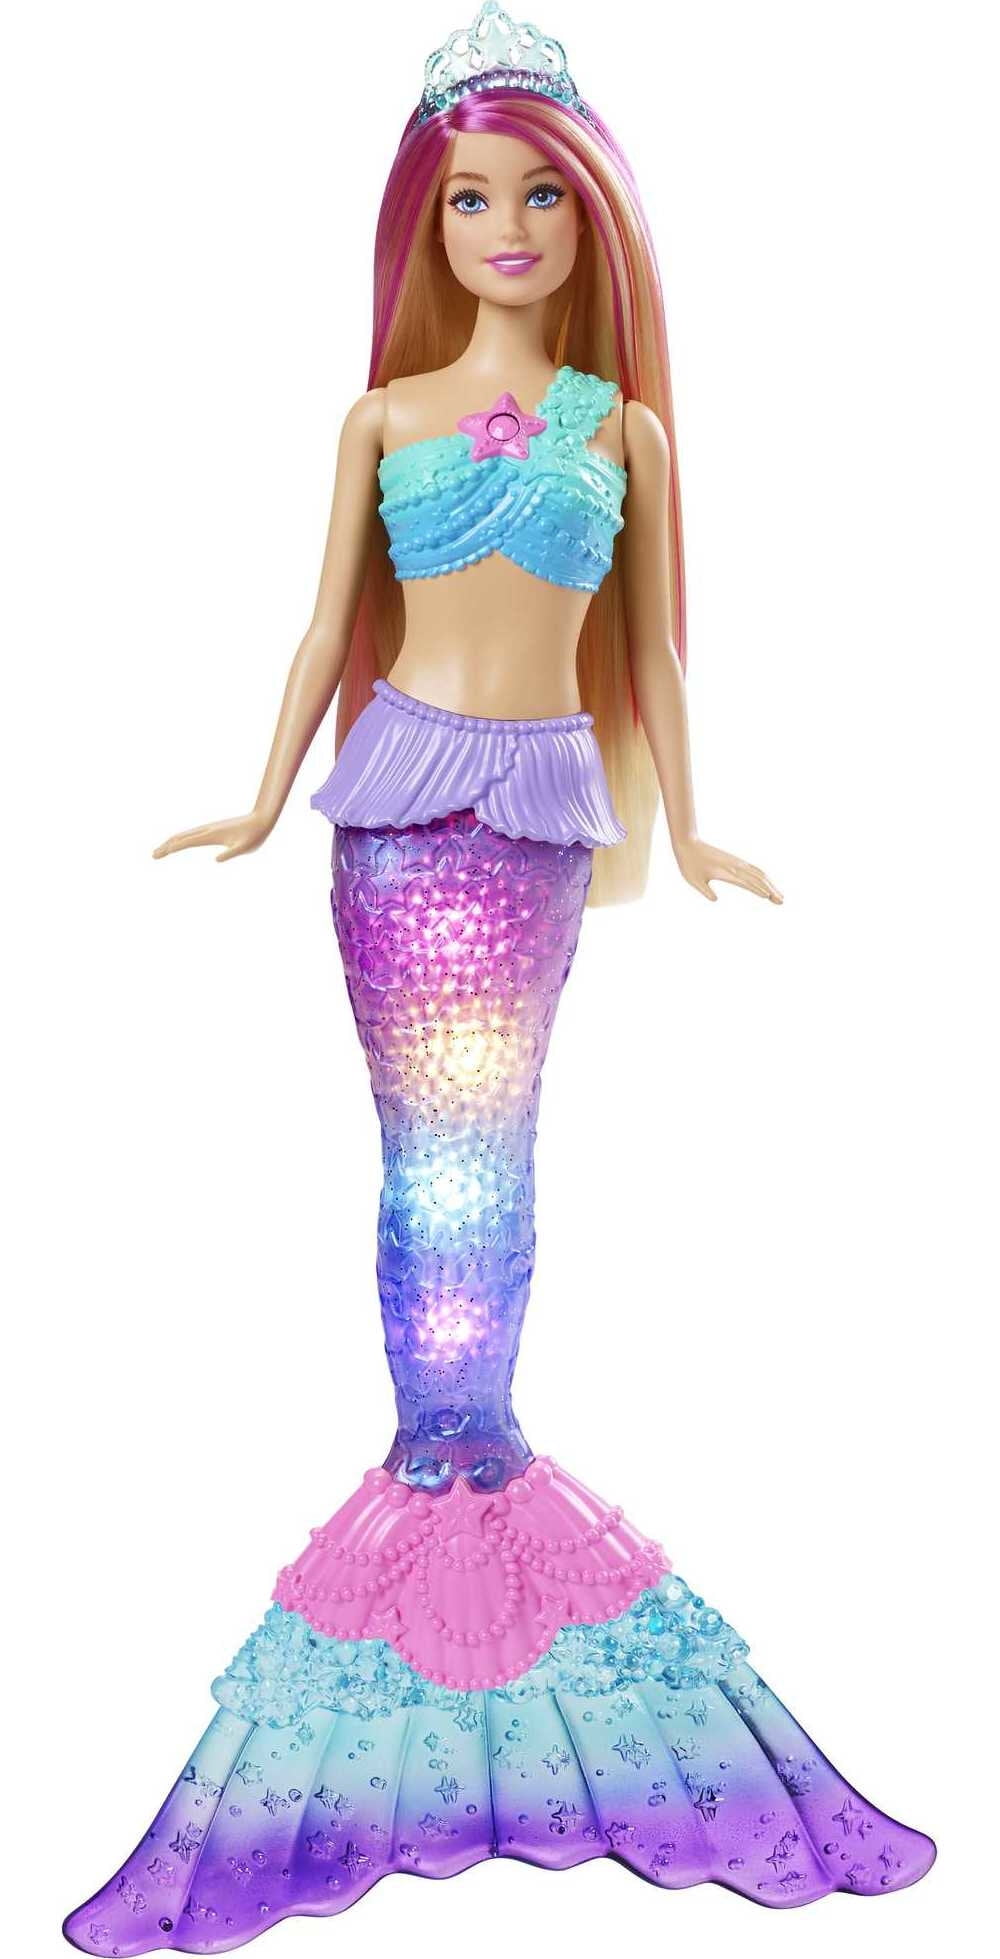 Barbie Dreamtopia Mermaid Doll with Twinkle Light-Up Tail and Pink-Streaked Hair